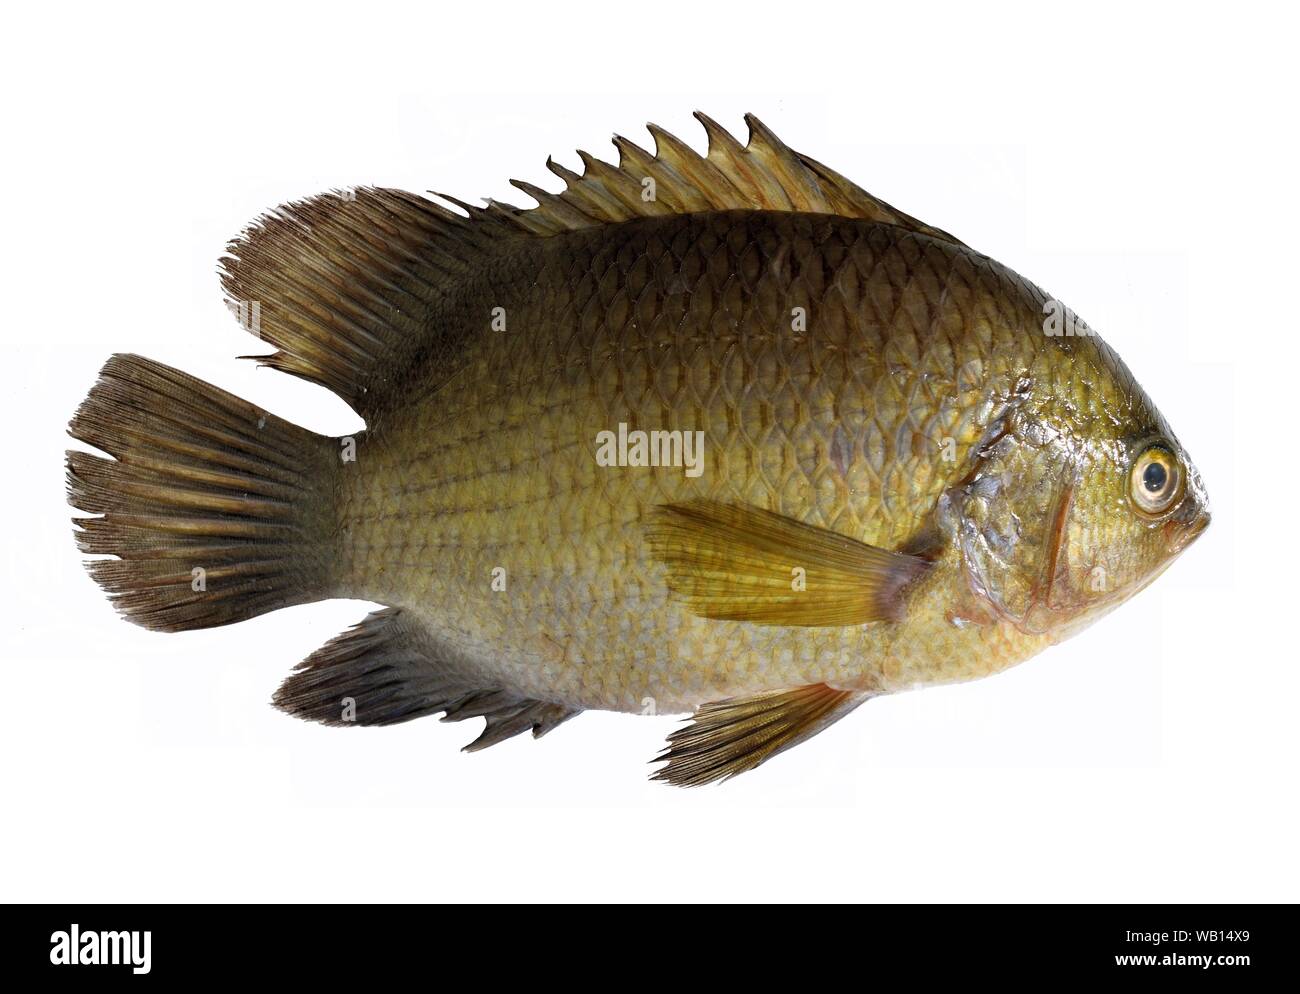 Striped tiger leaffish, Pristolepis fasciata on white background, Important aquacultured freshwater species in Thailand Stock Photo